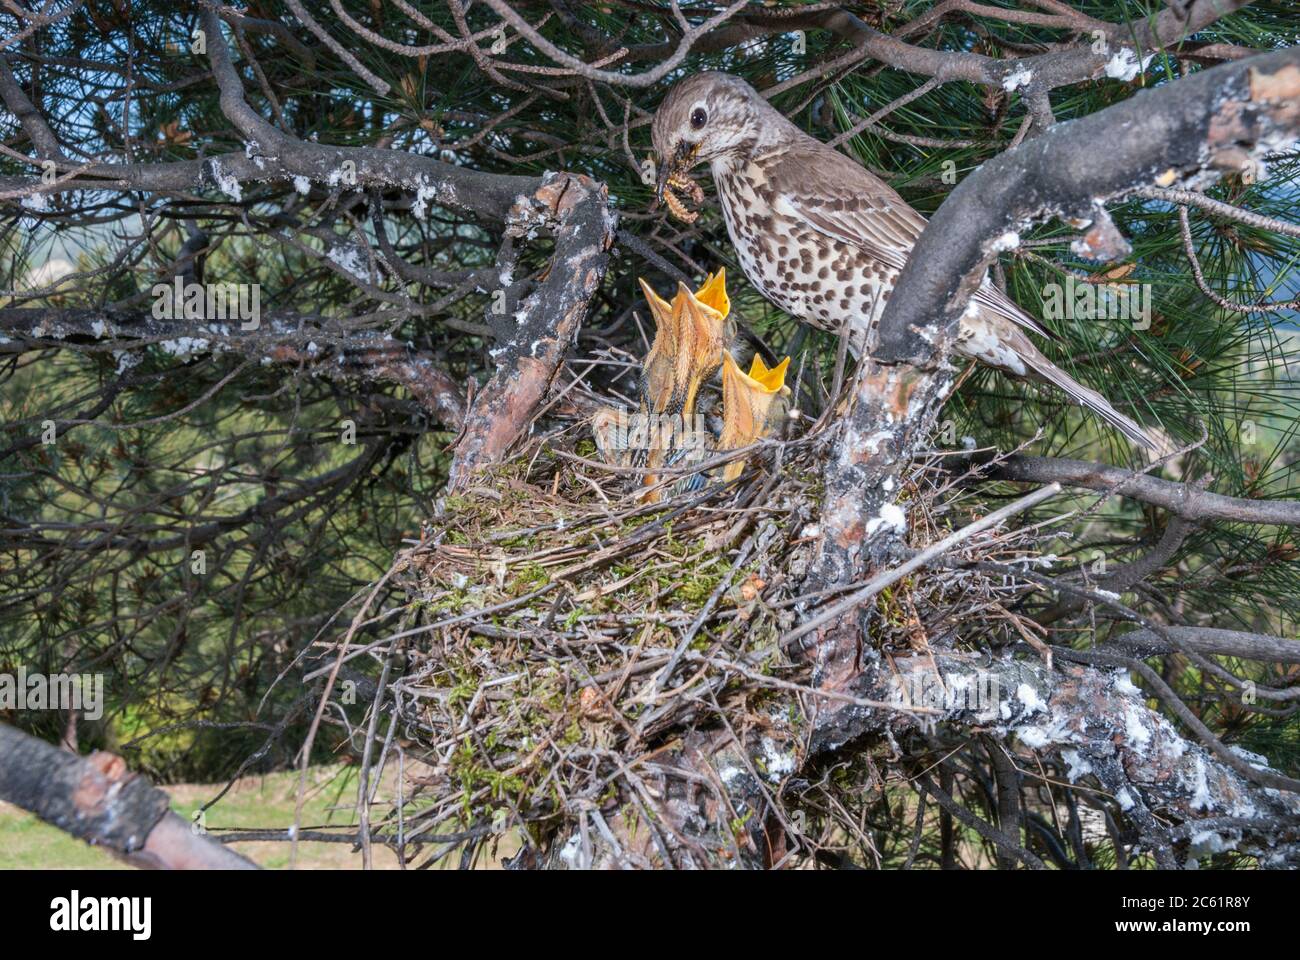 A mistle thrush (Turdus viscivorus) feeding the nestlings with worms in the nest on a tree Stock Photo